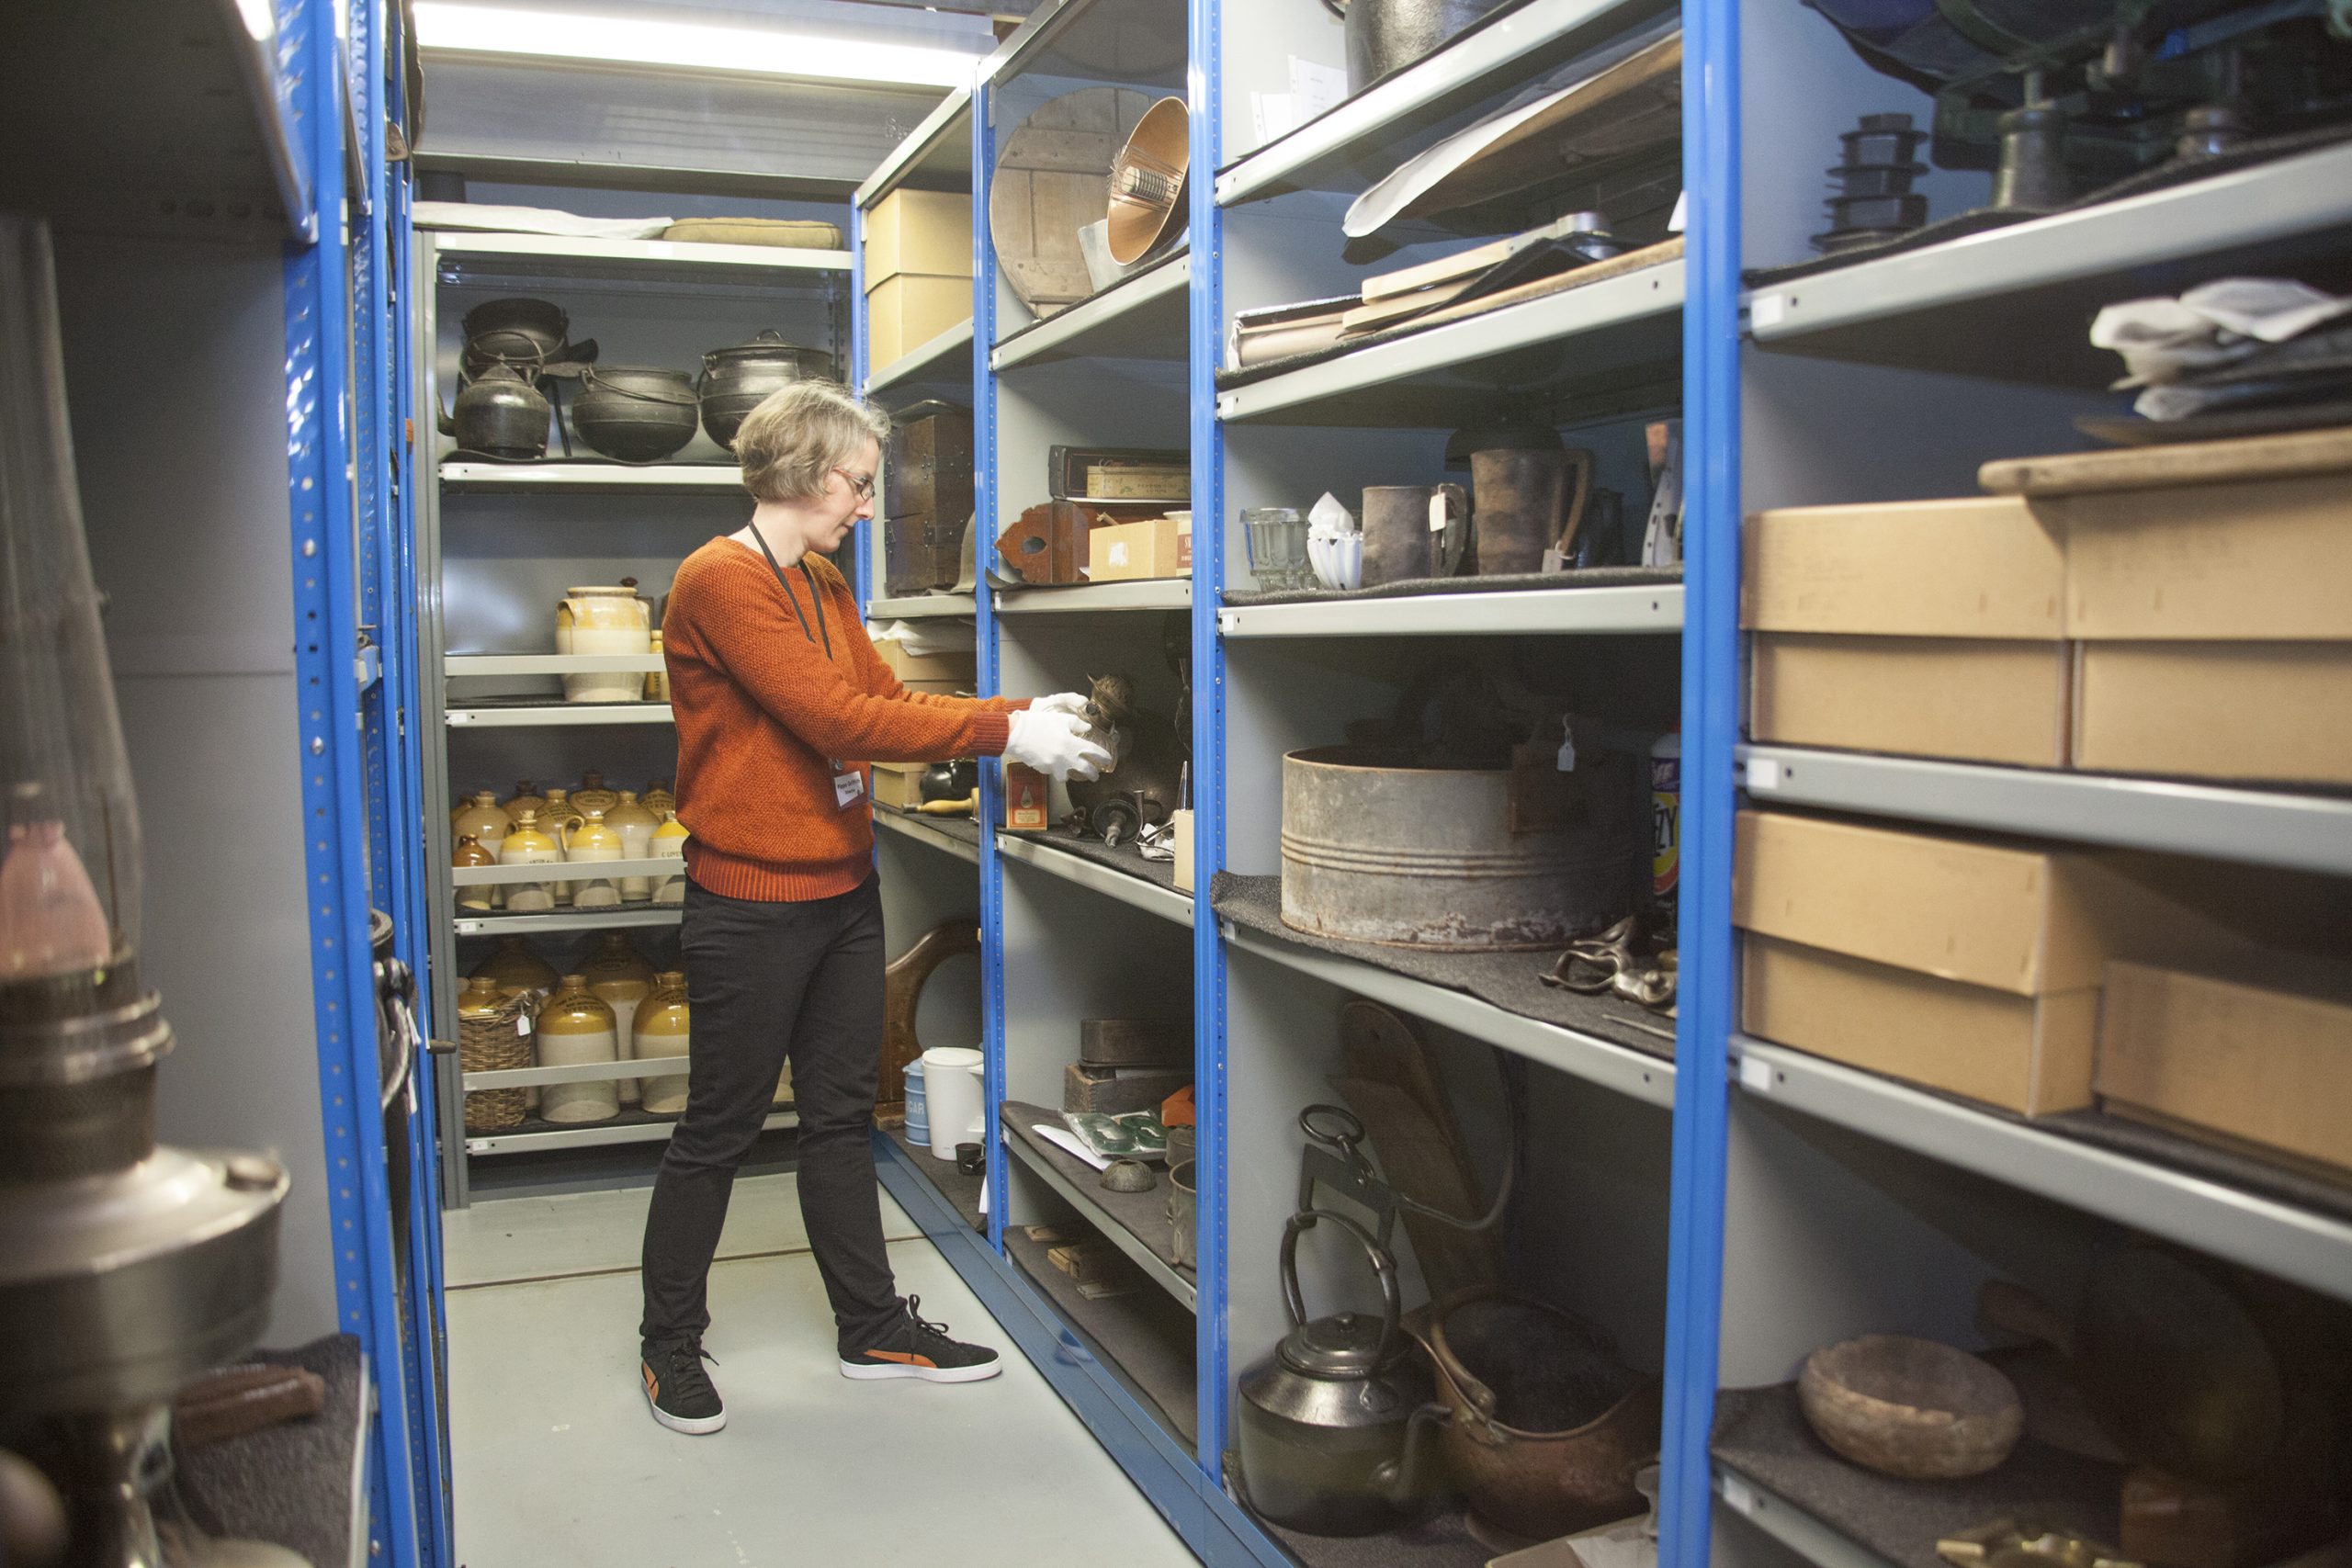 A woman in an orange jumper and black trousers standing in a museum store. She is wearing white cotton gloves and placing a museum object on a rack of shelving which has other museum objects and boxes on.